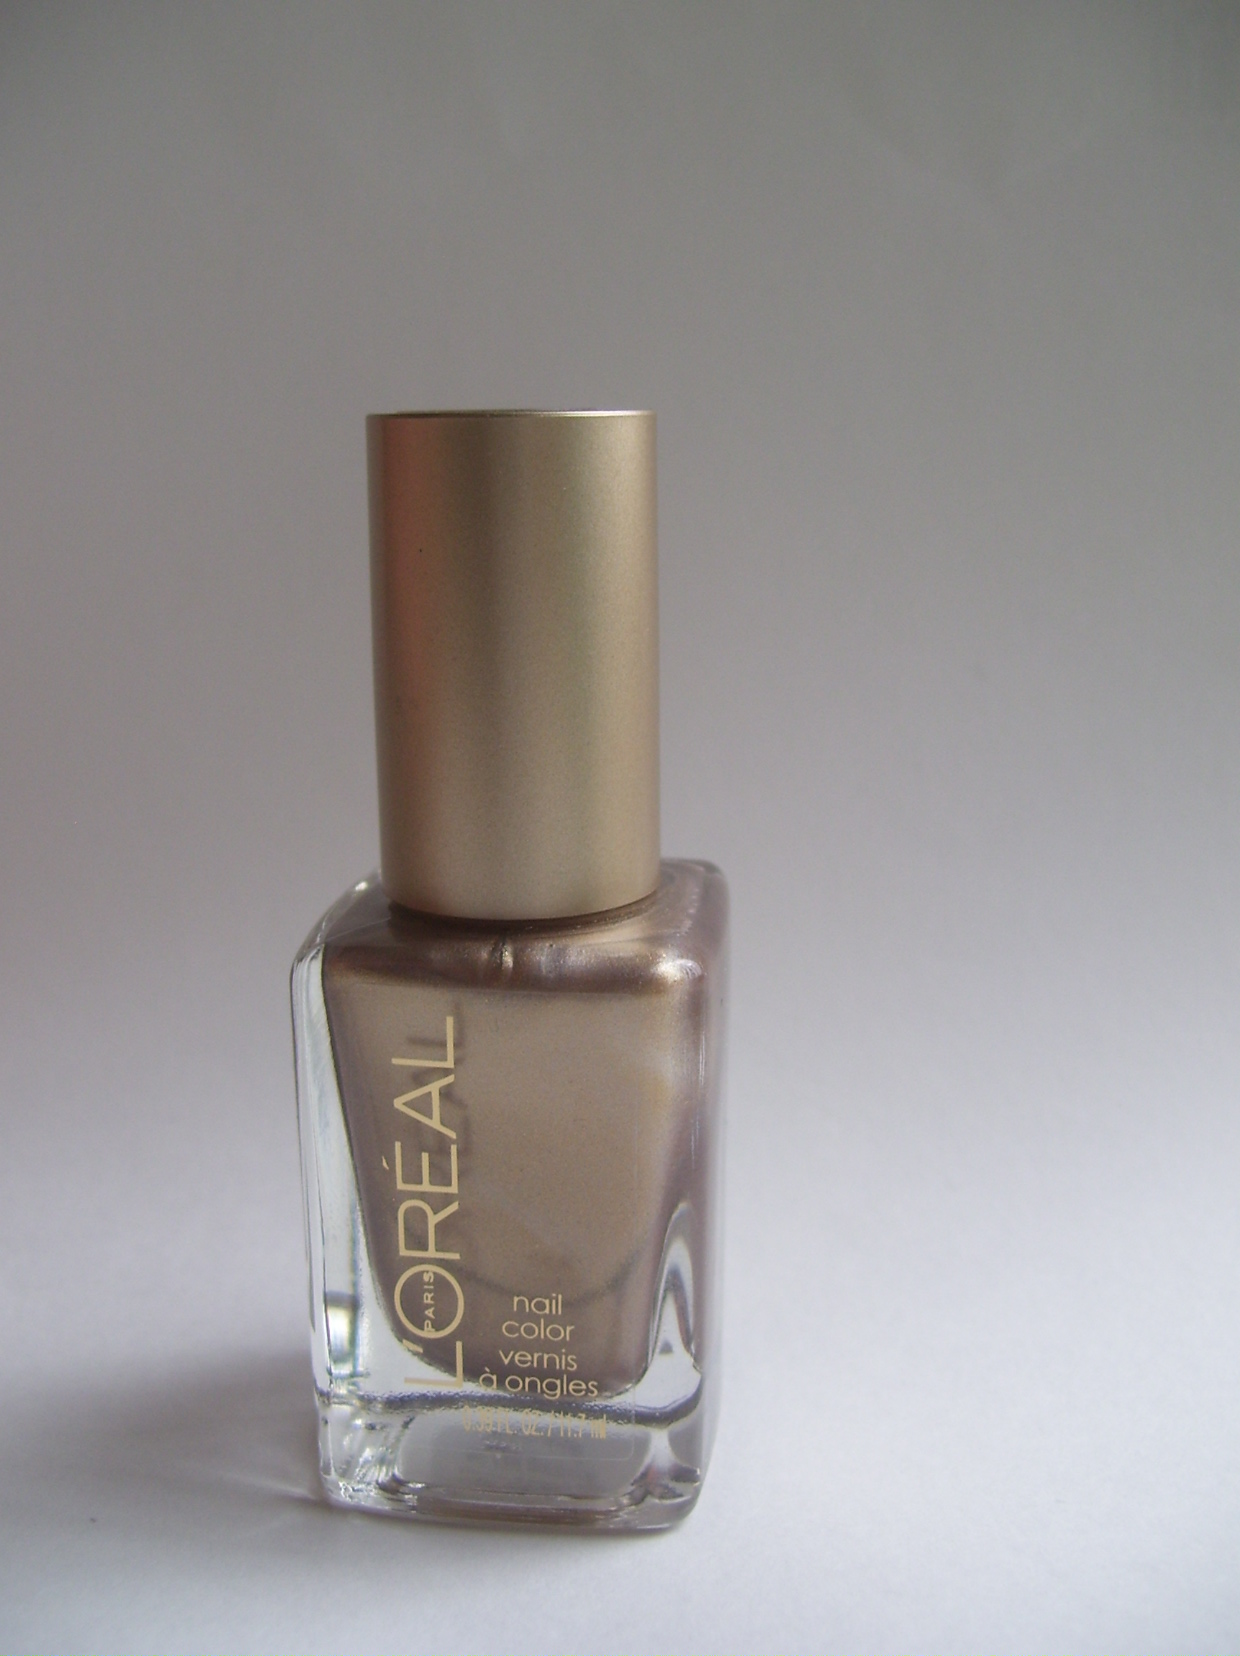 Swatch & Review: *New* L’Oreal Paris Colour Riche Nail Color – Because You’re Worth It